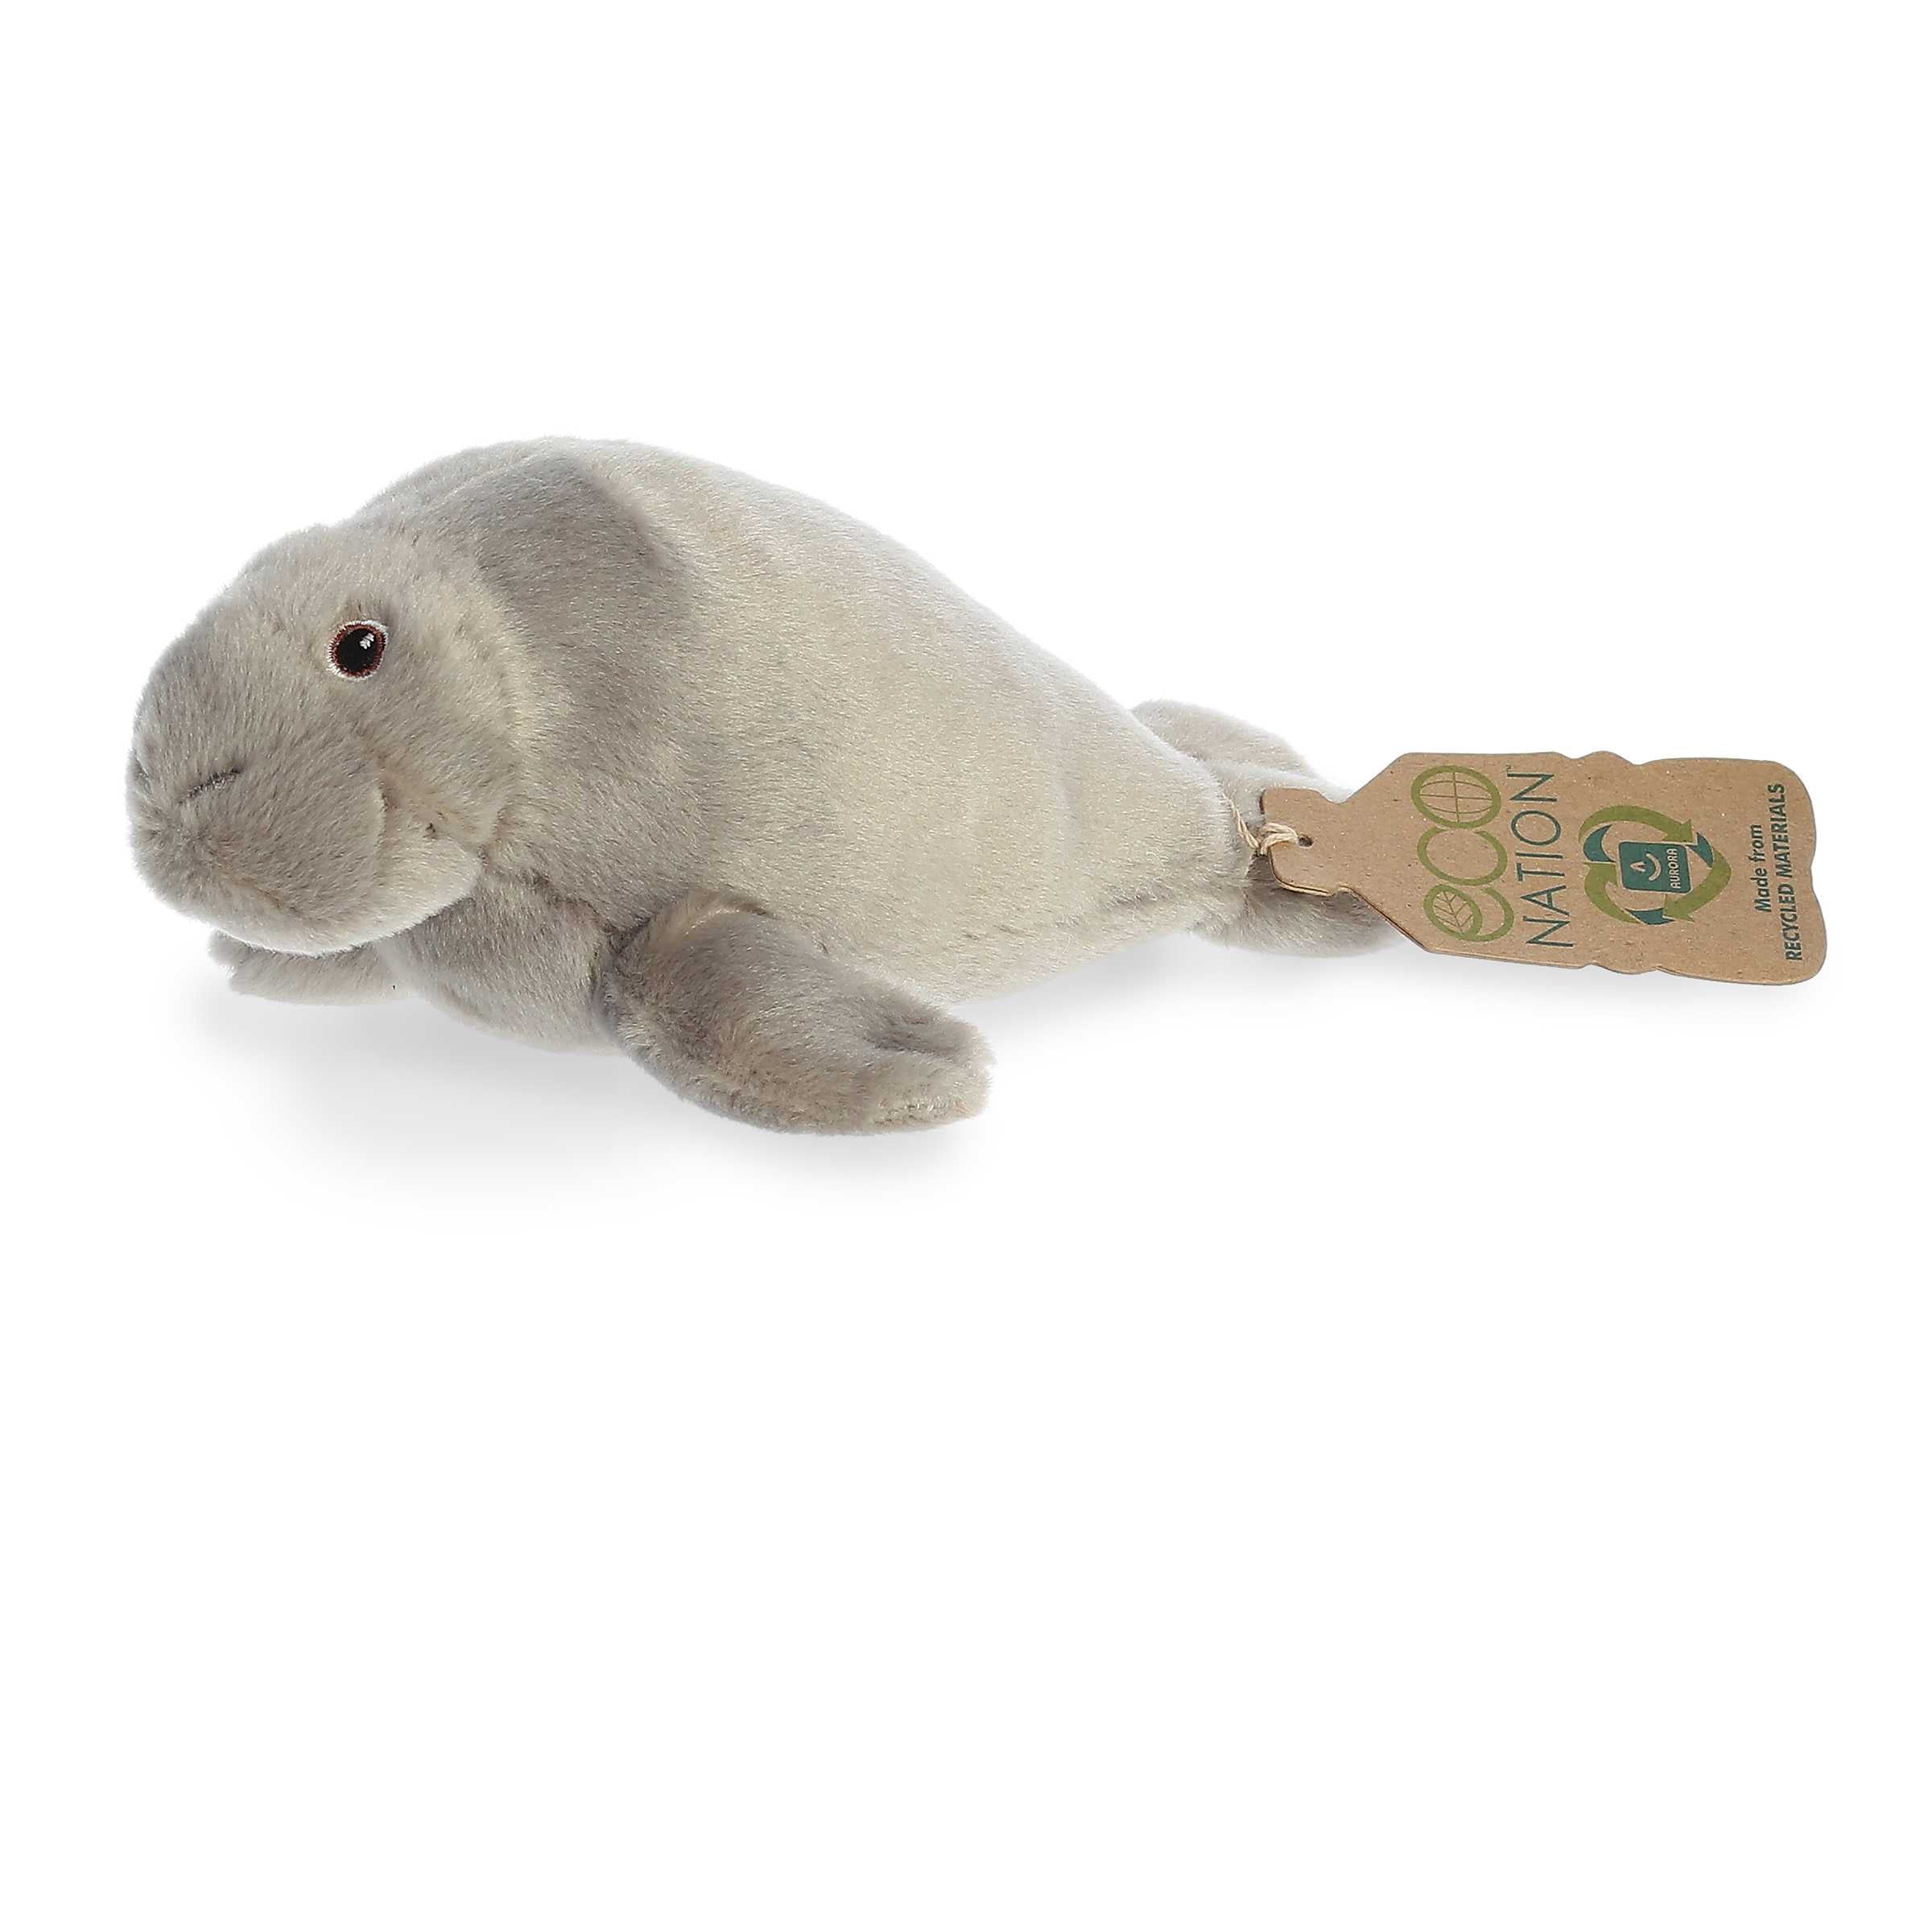 Eco Softie Manatee Plush, crafted from recycled plastic bottles, in gentle grey, with a hang tag for environmental awareness.